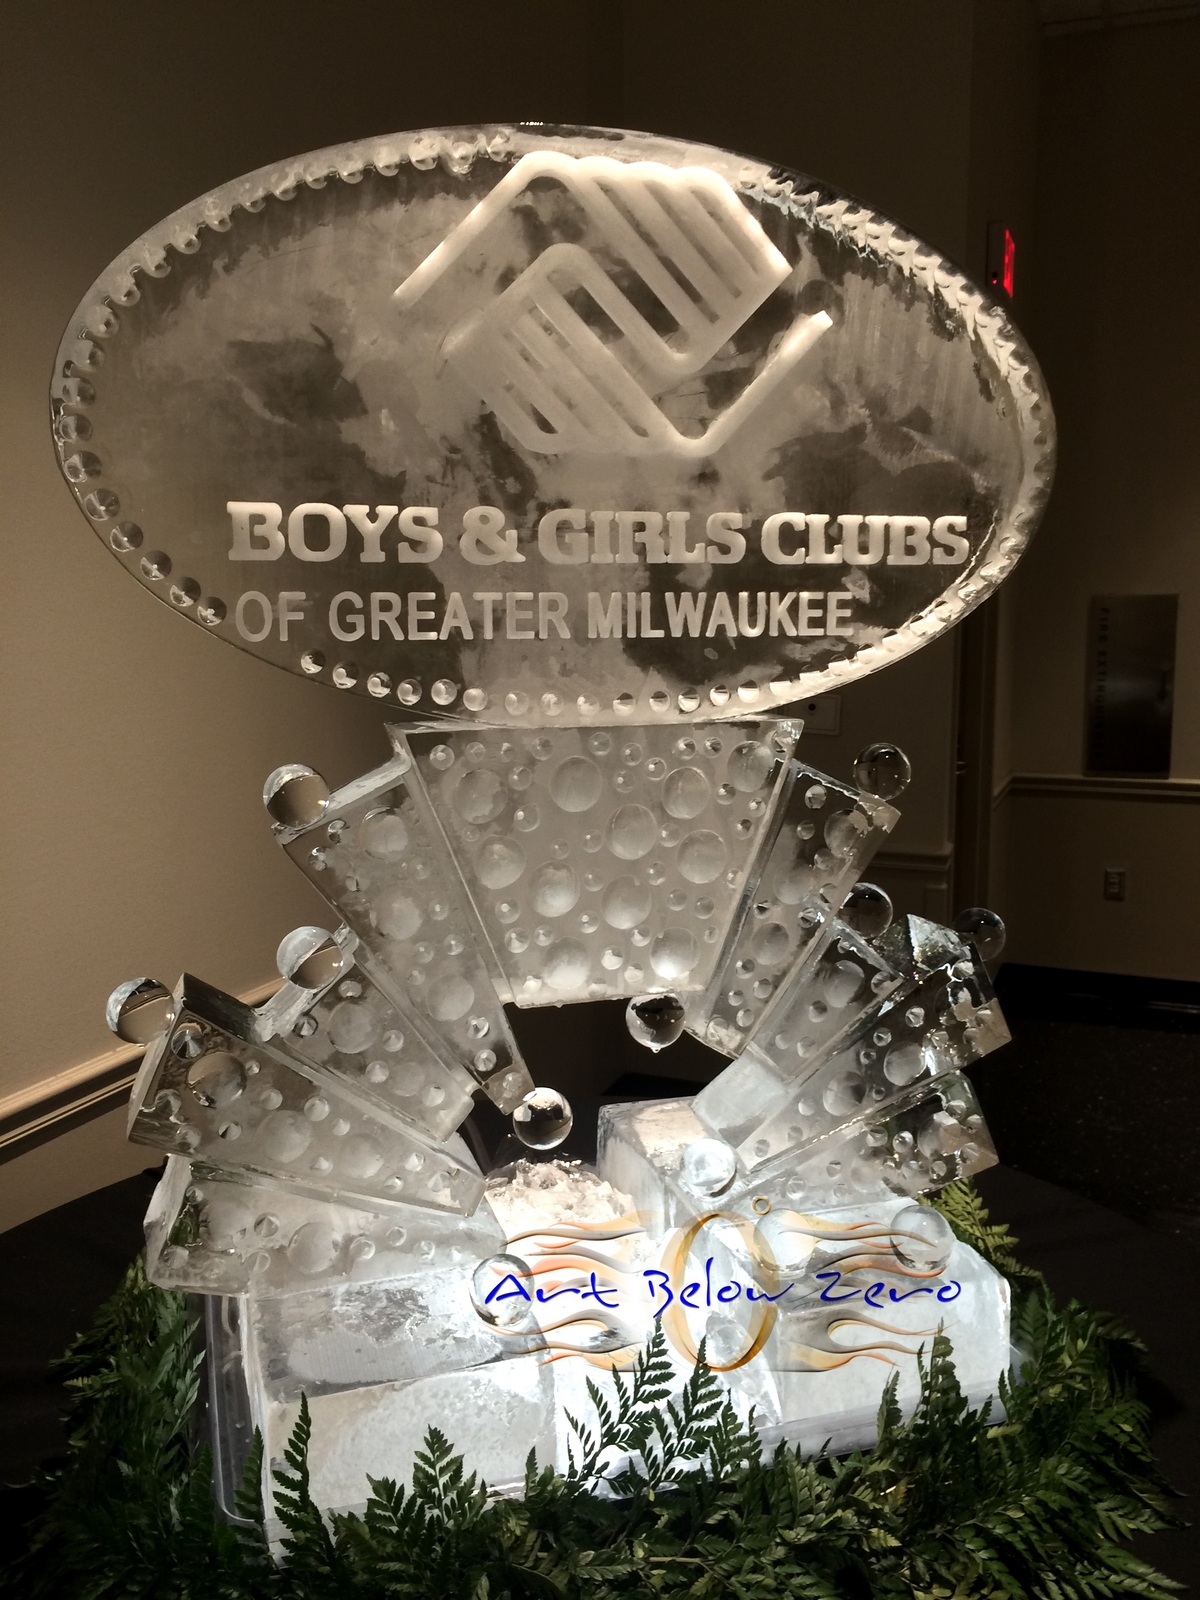 Boys___girls_clubs_of_greater_milwaukee_ice_sculpture